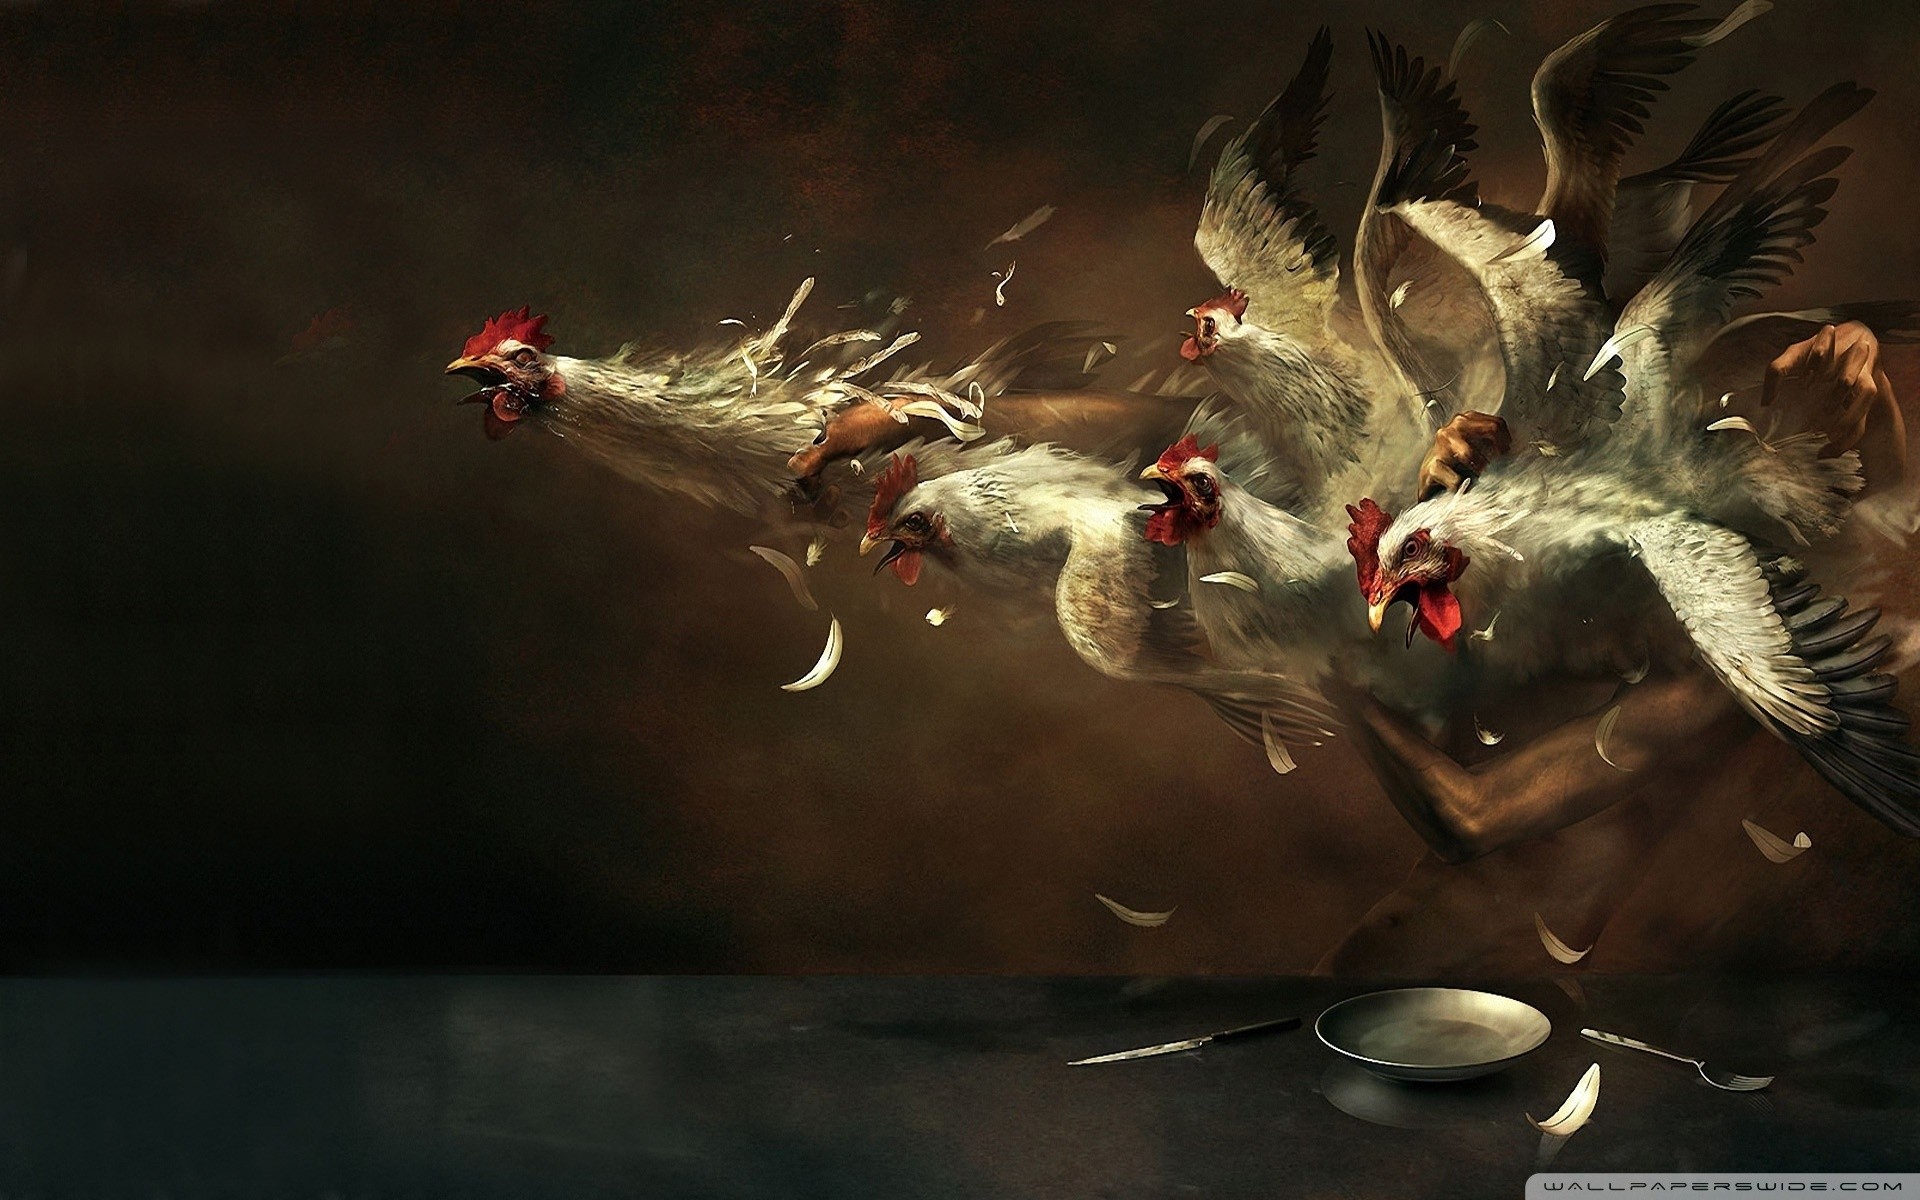 painting, Artwork, Birds, Chickens, Flying, Feathers, Plates, Knife Wallpaper